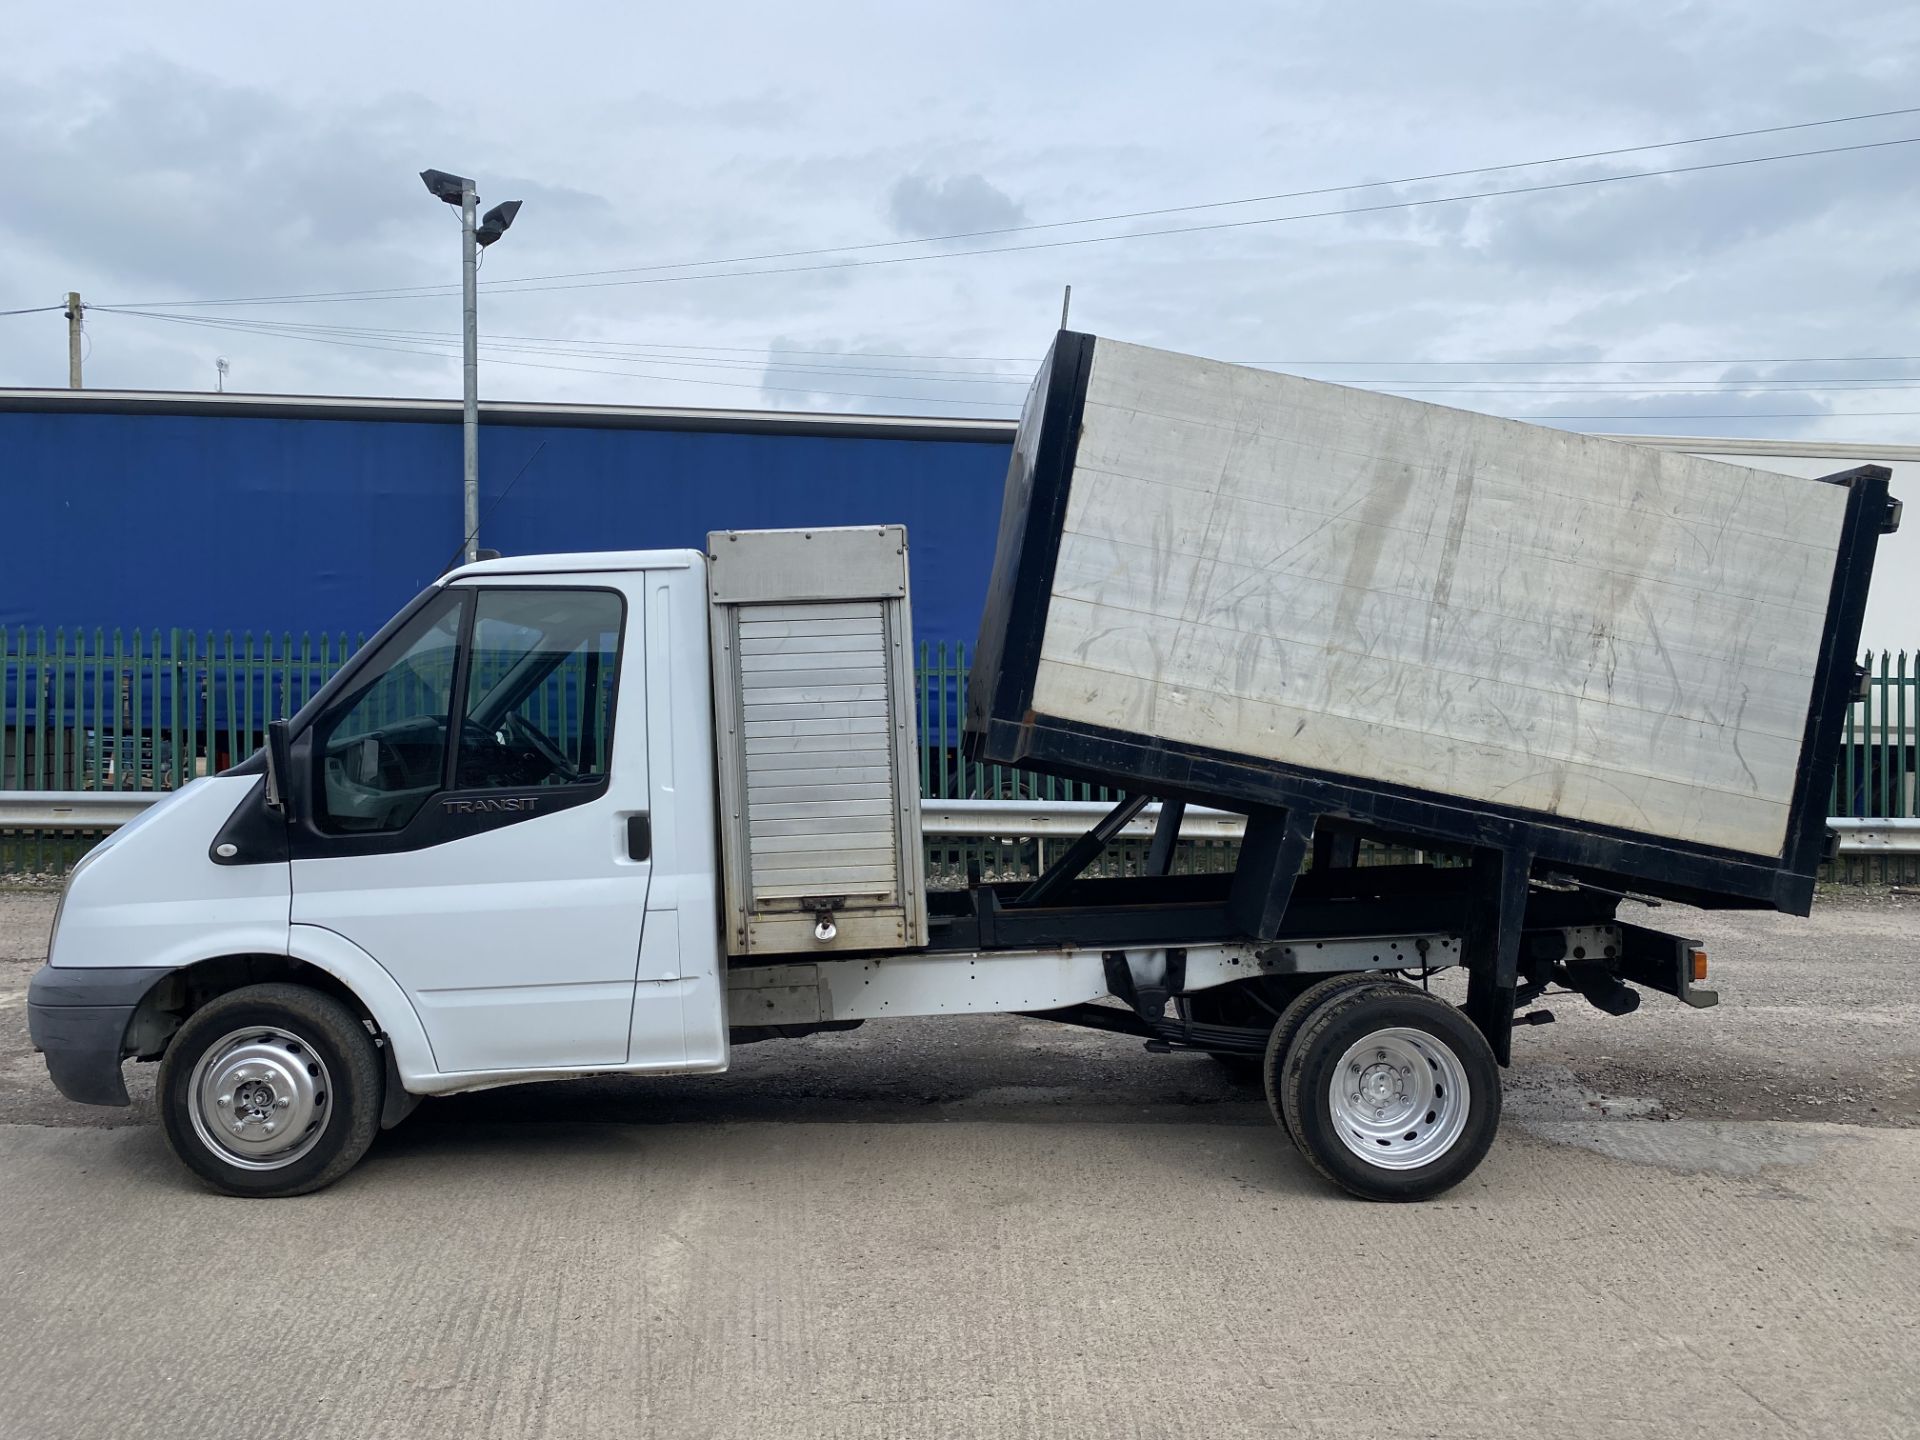 (Reserve Met) Ford Transit 2.2Tdci (125psi) T350 Tipper Truck -12 Reg - High Sides- Twin Rear Wheels - Image 5 of 15